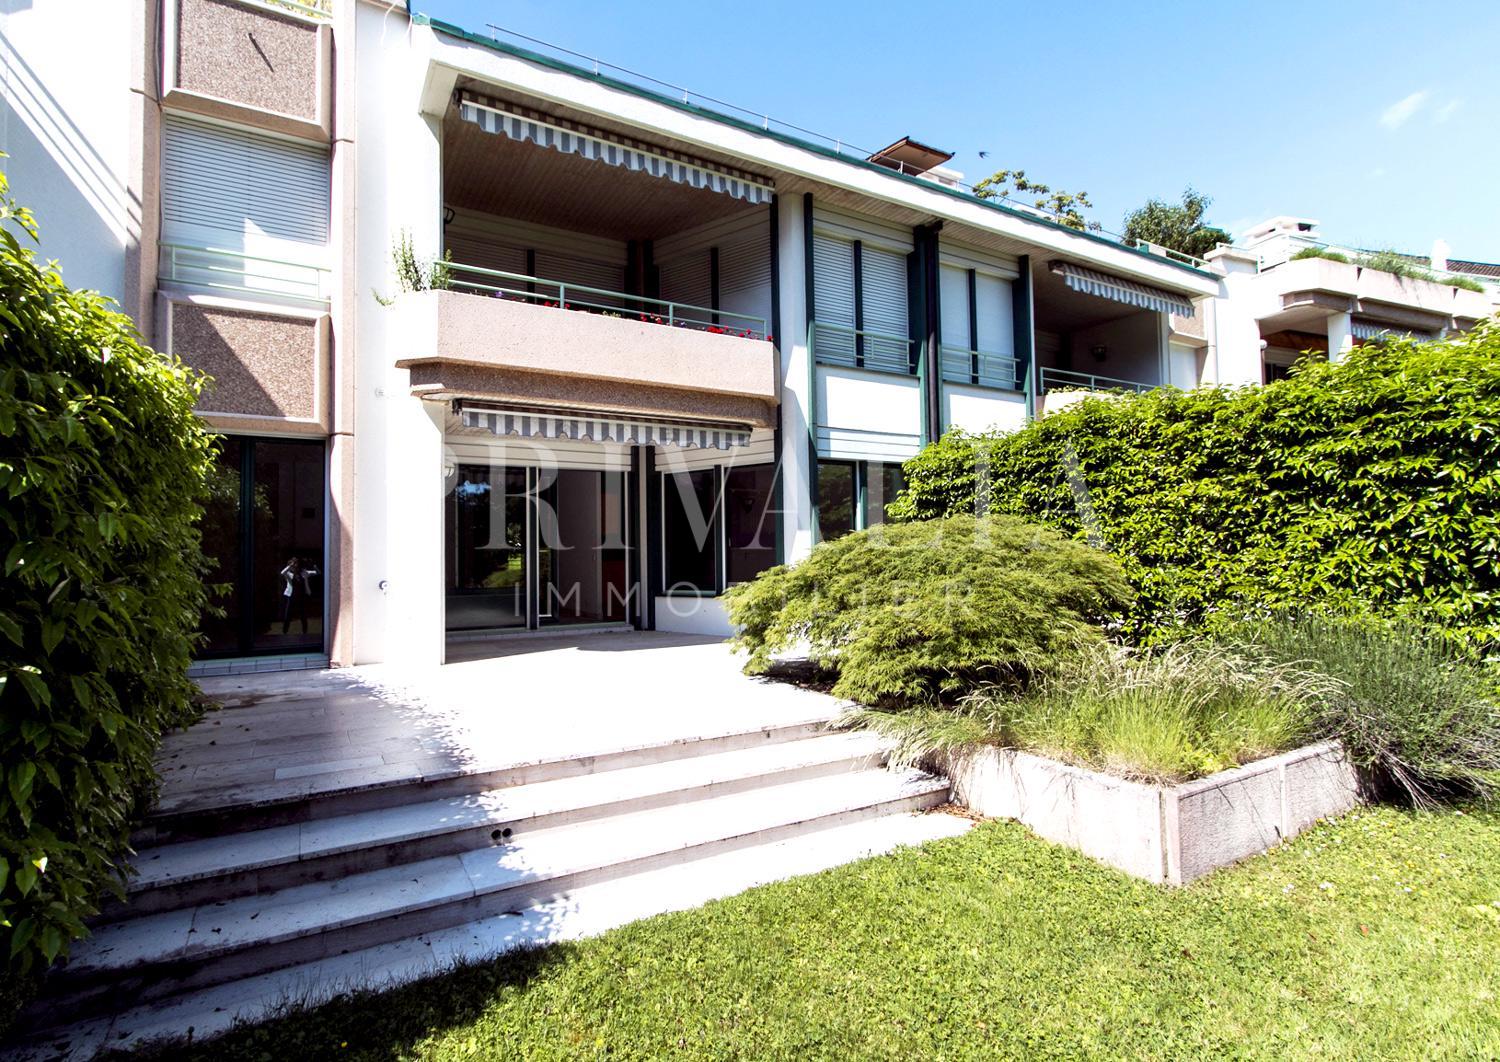 PrivaliaMagnificent garden-level apartment in a secure residence a stone’s throw from the lake